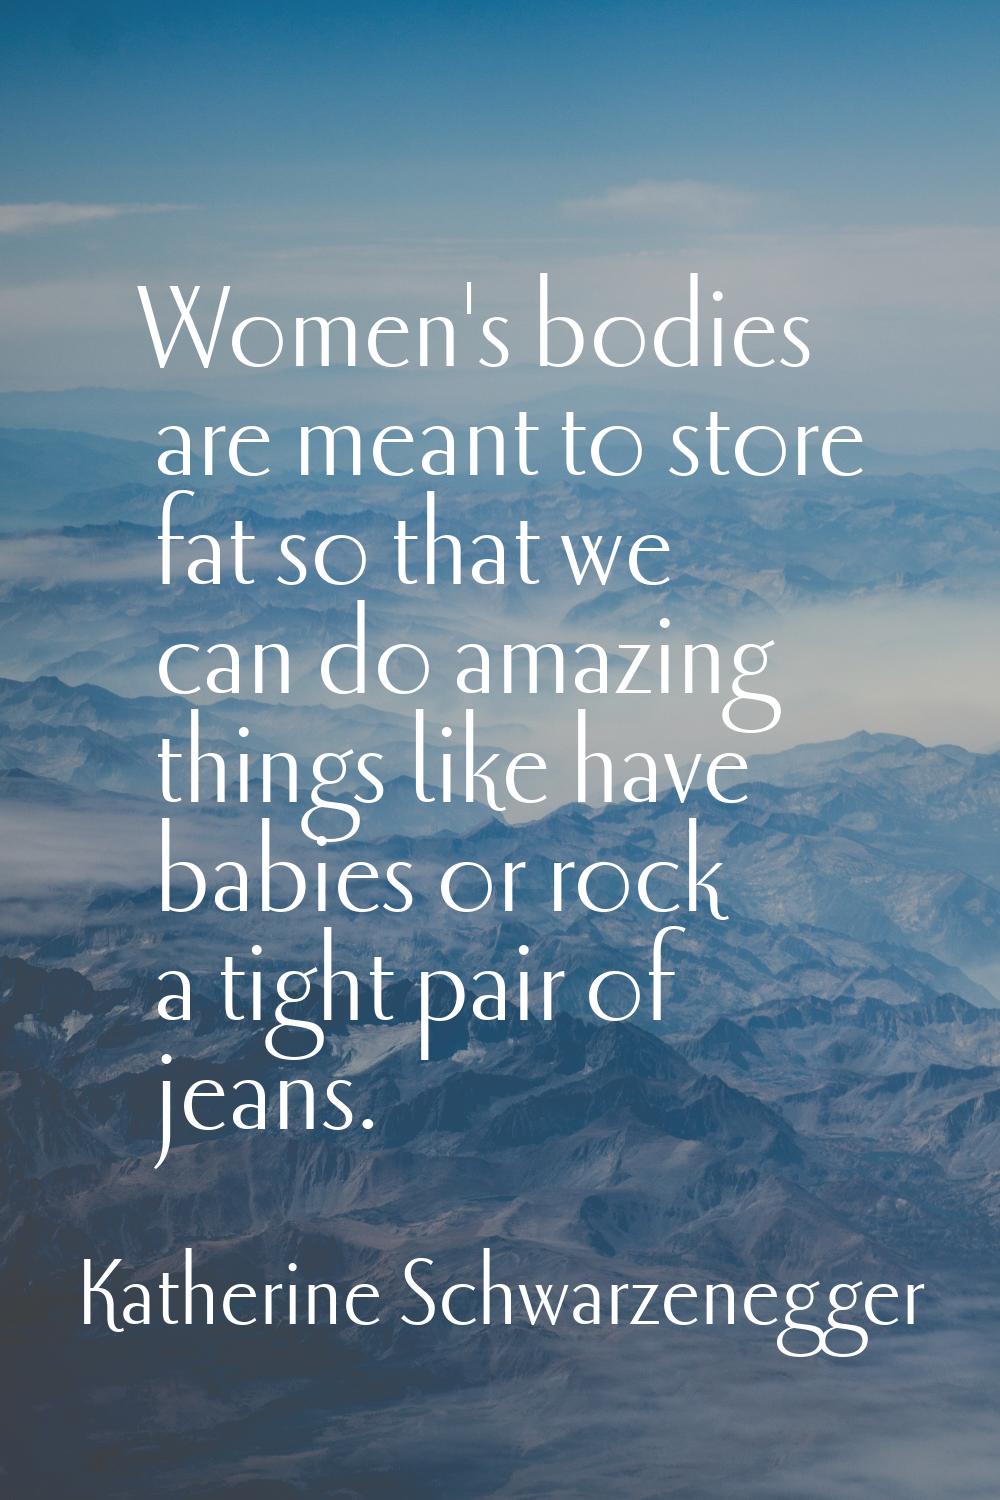 Women's bodies are meant to store fat so that we can do amazing things like have babies or rock a t